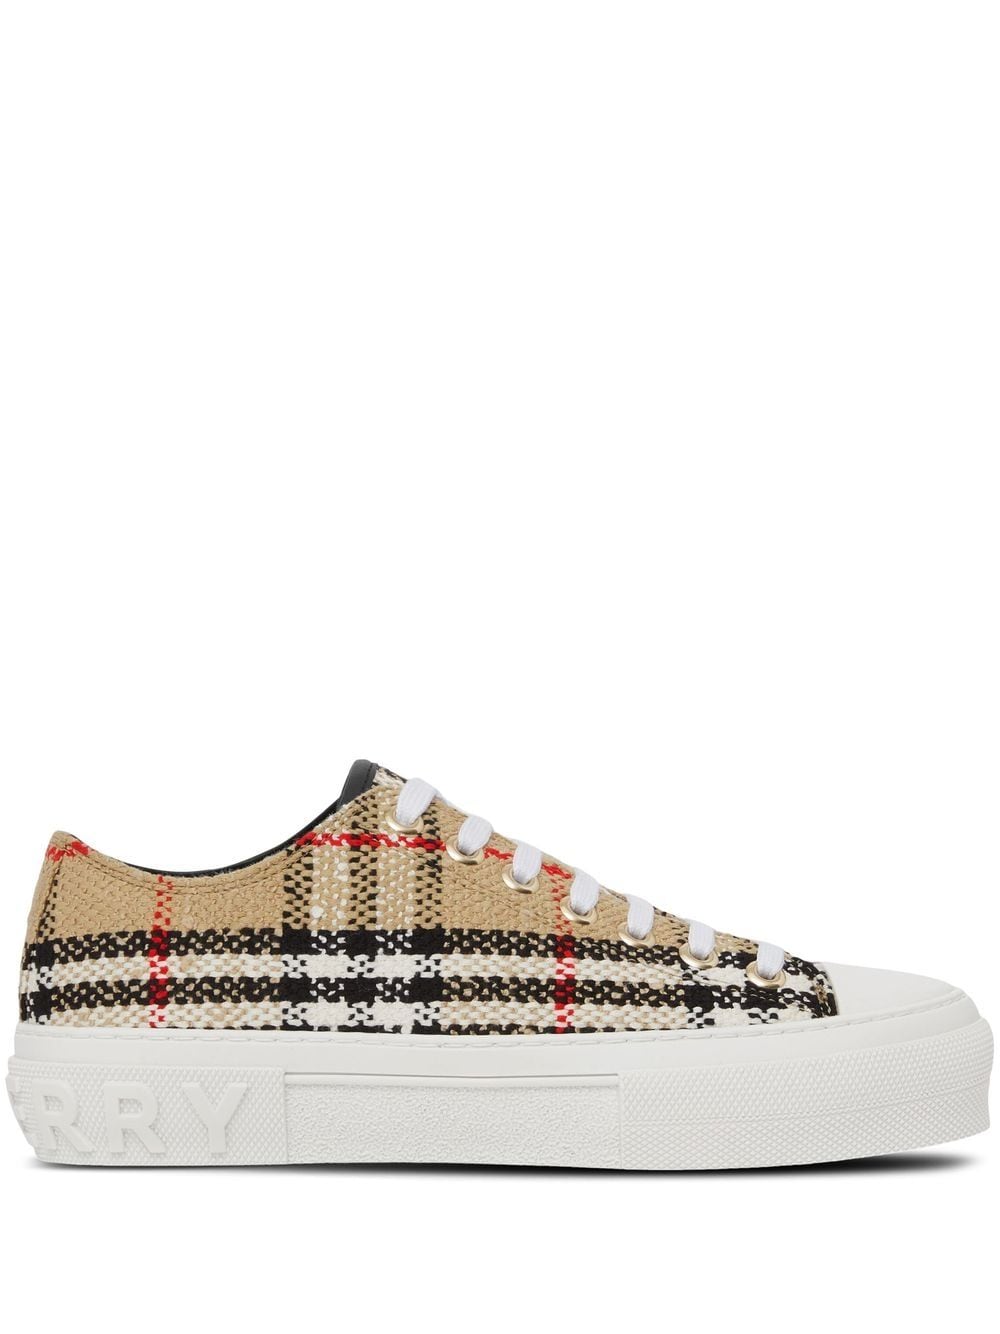 Burberry Vintage Check Bouclé Low-top Sneakers In Brown